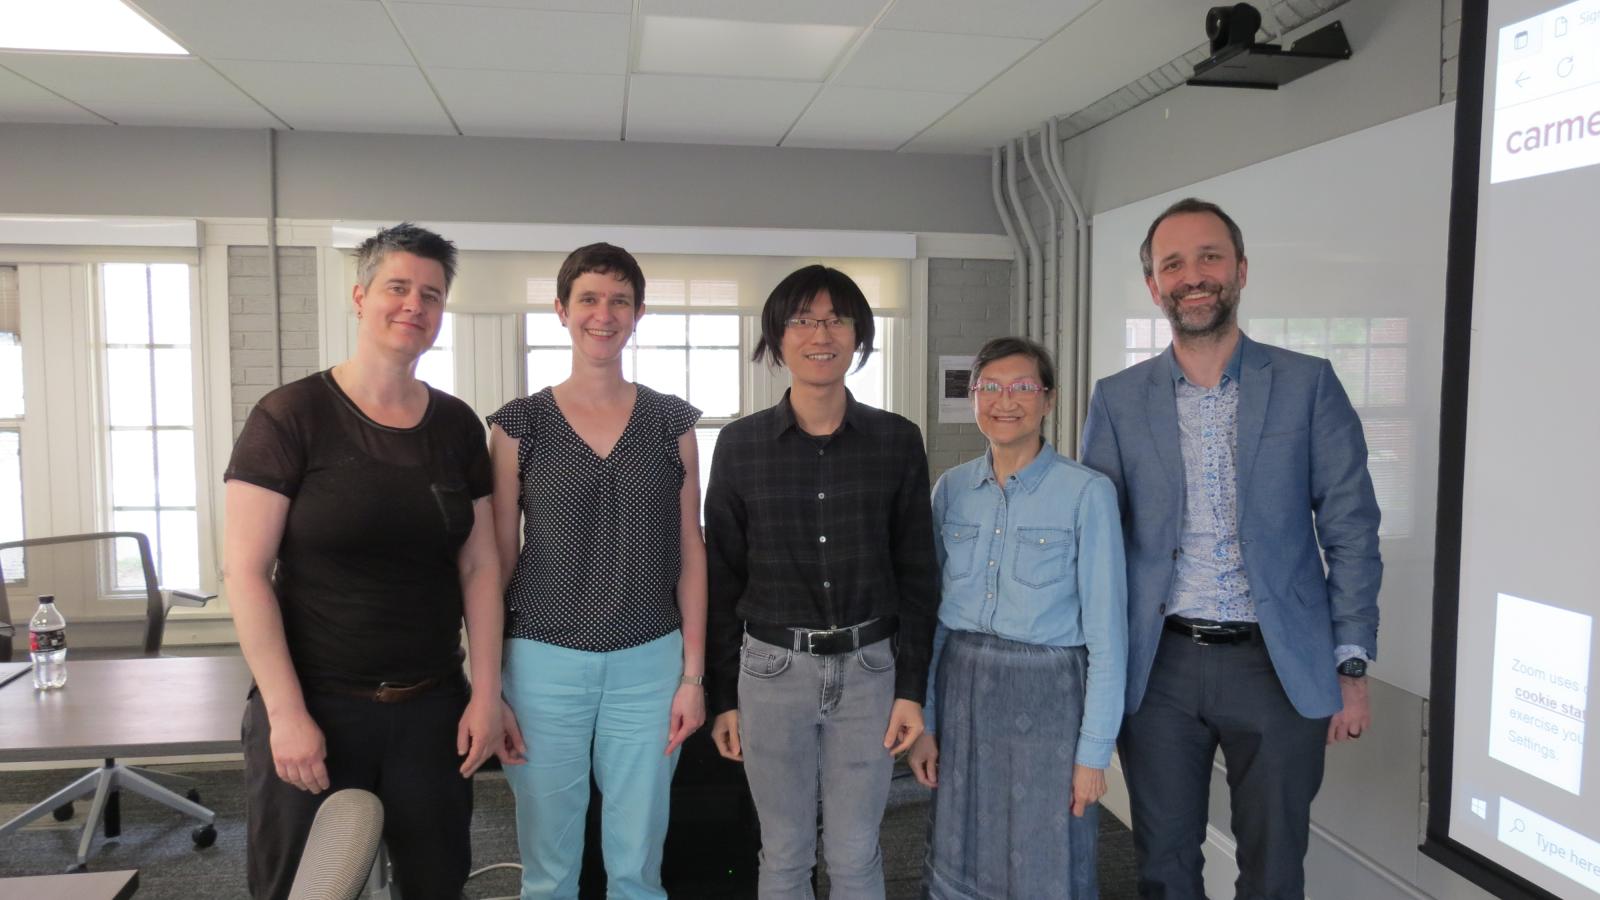 Yuhong Zhu with his committee (Becca Morley, Cynthia Clopper, Marjorie Chan, and advisor Bjoern Koehnlein) after his successful defense